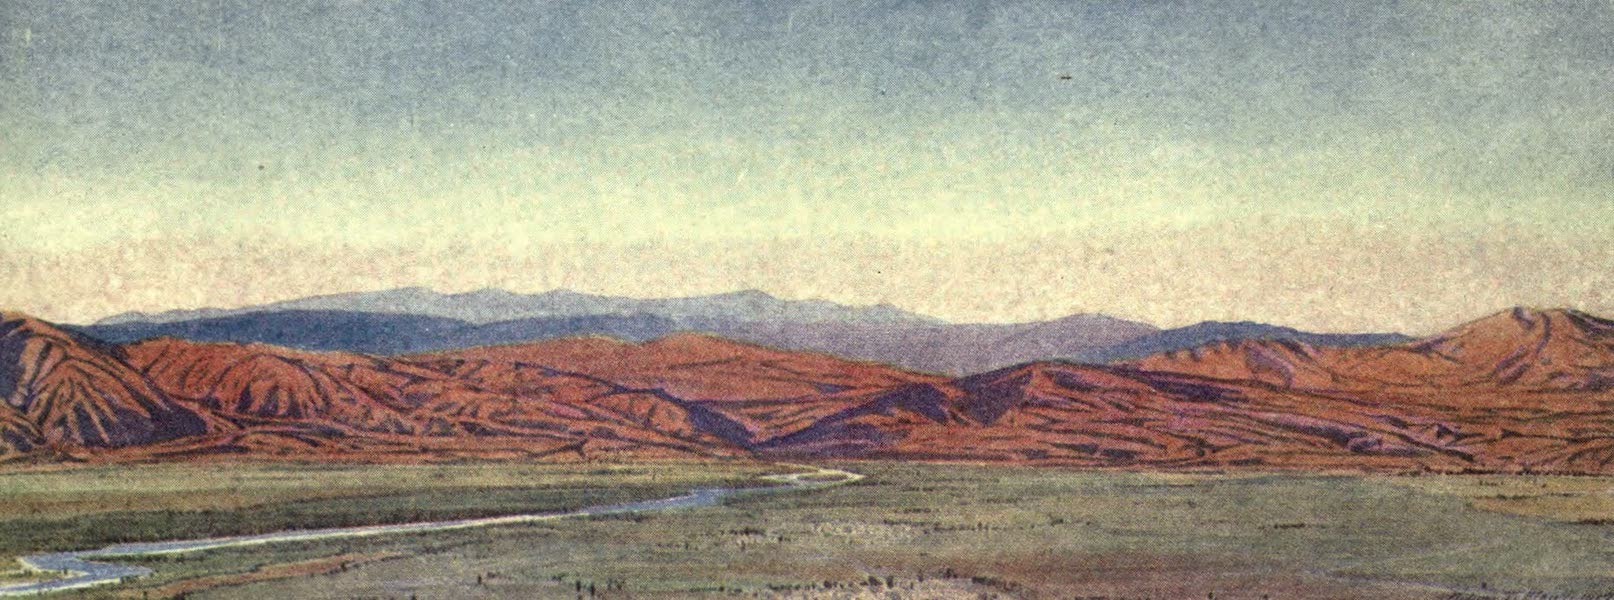 The Salonika Front - Rupel Pass and Struma Valley Villages, from Gumusdere (1920)